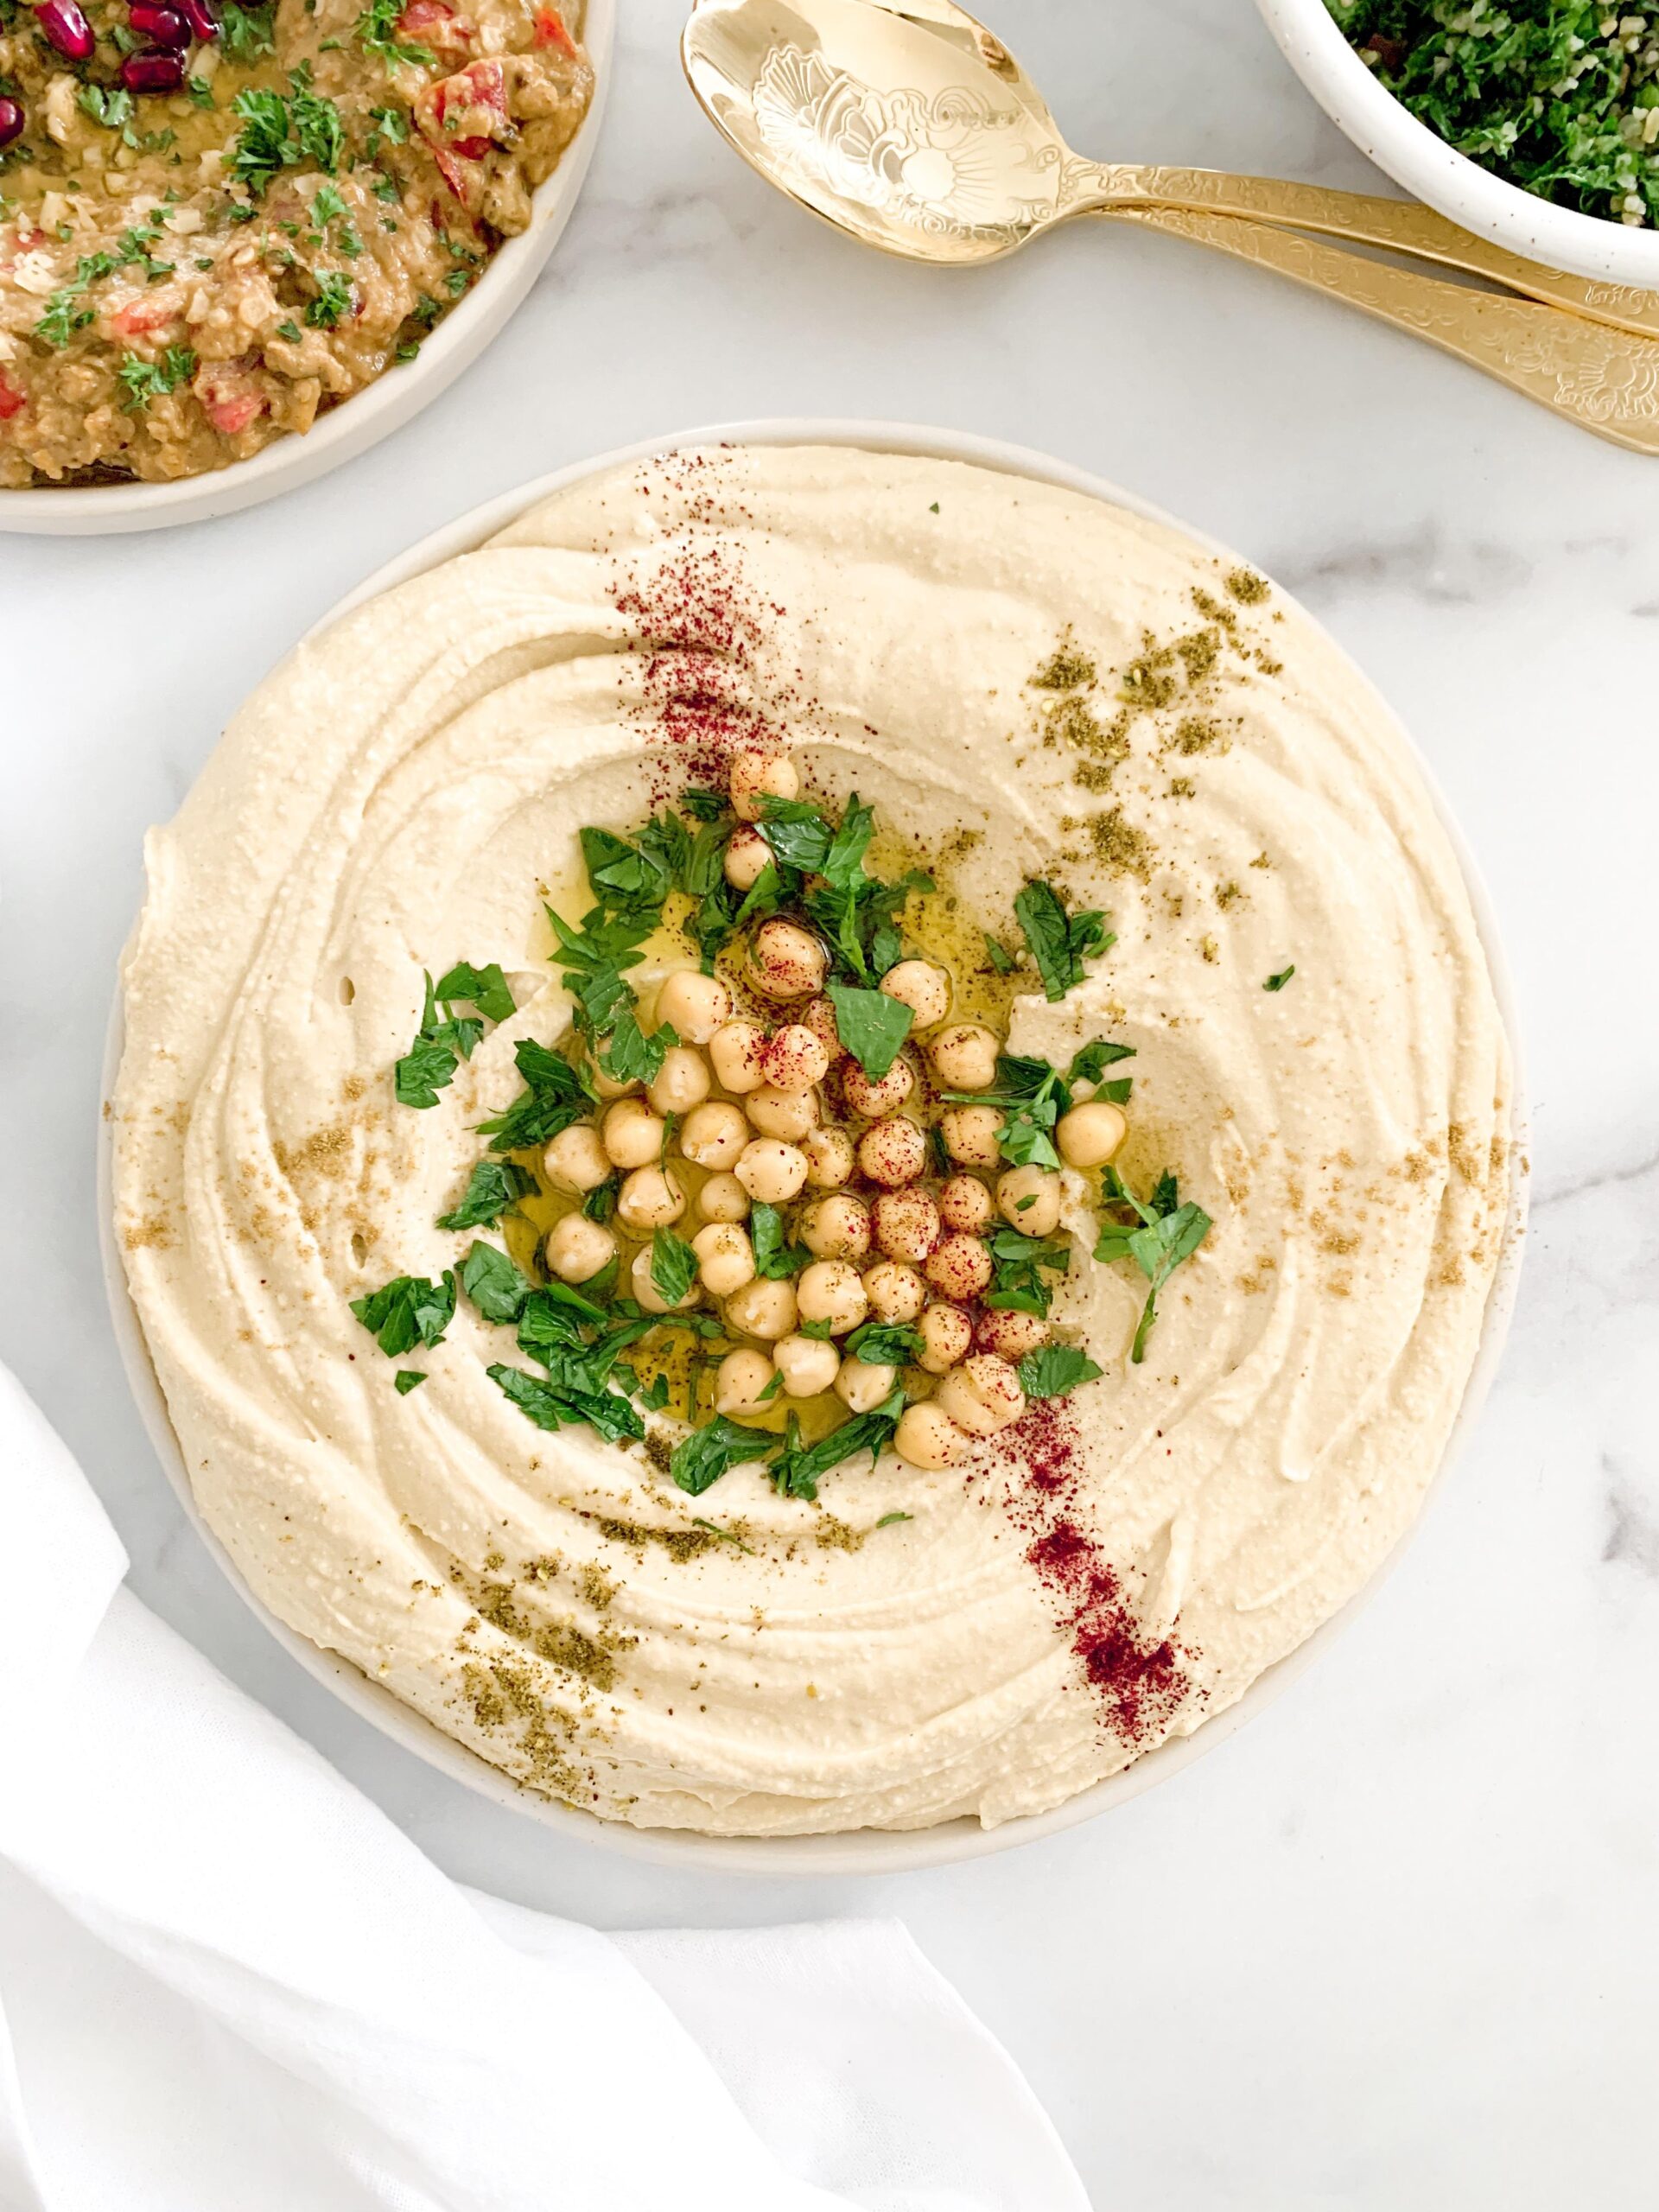  The smooth texture and the blend of spices makes this hummus an irresistible addition to your snacks.